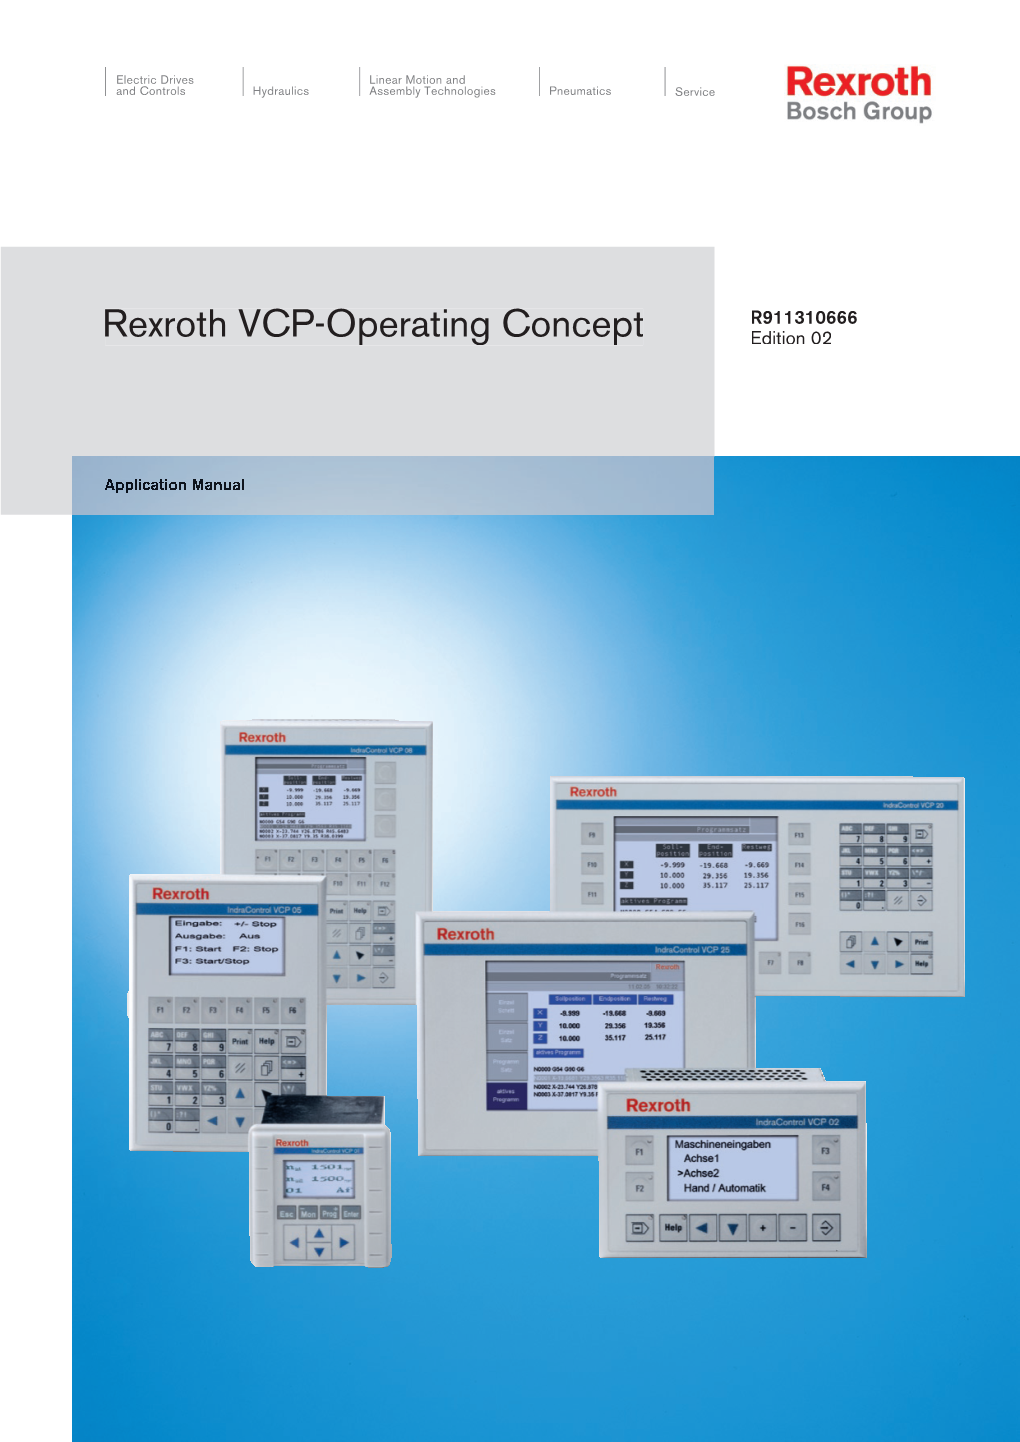 Rexroth VCP-Operating Concept Edition 02